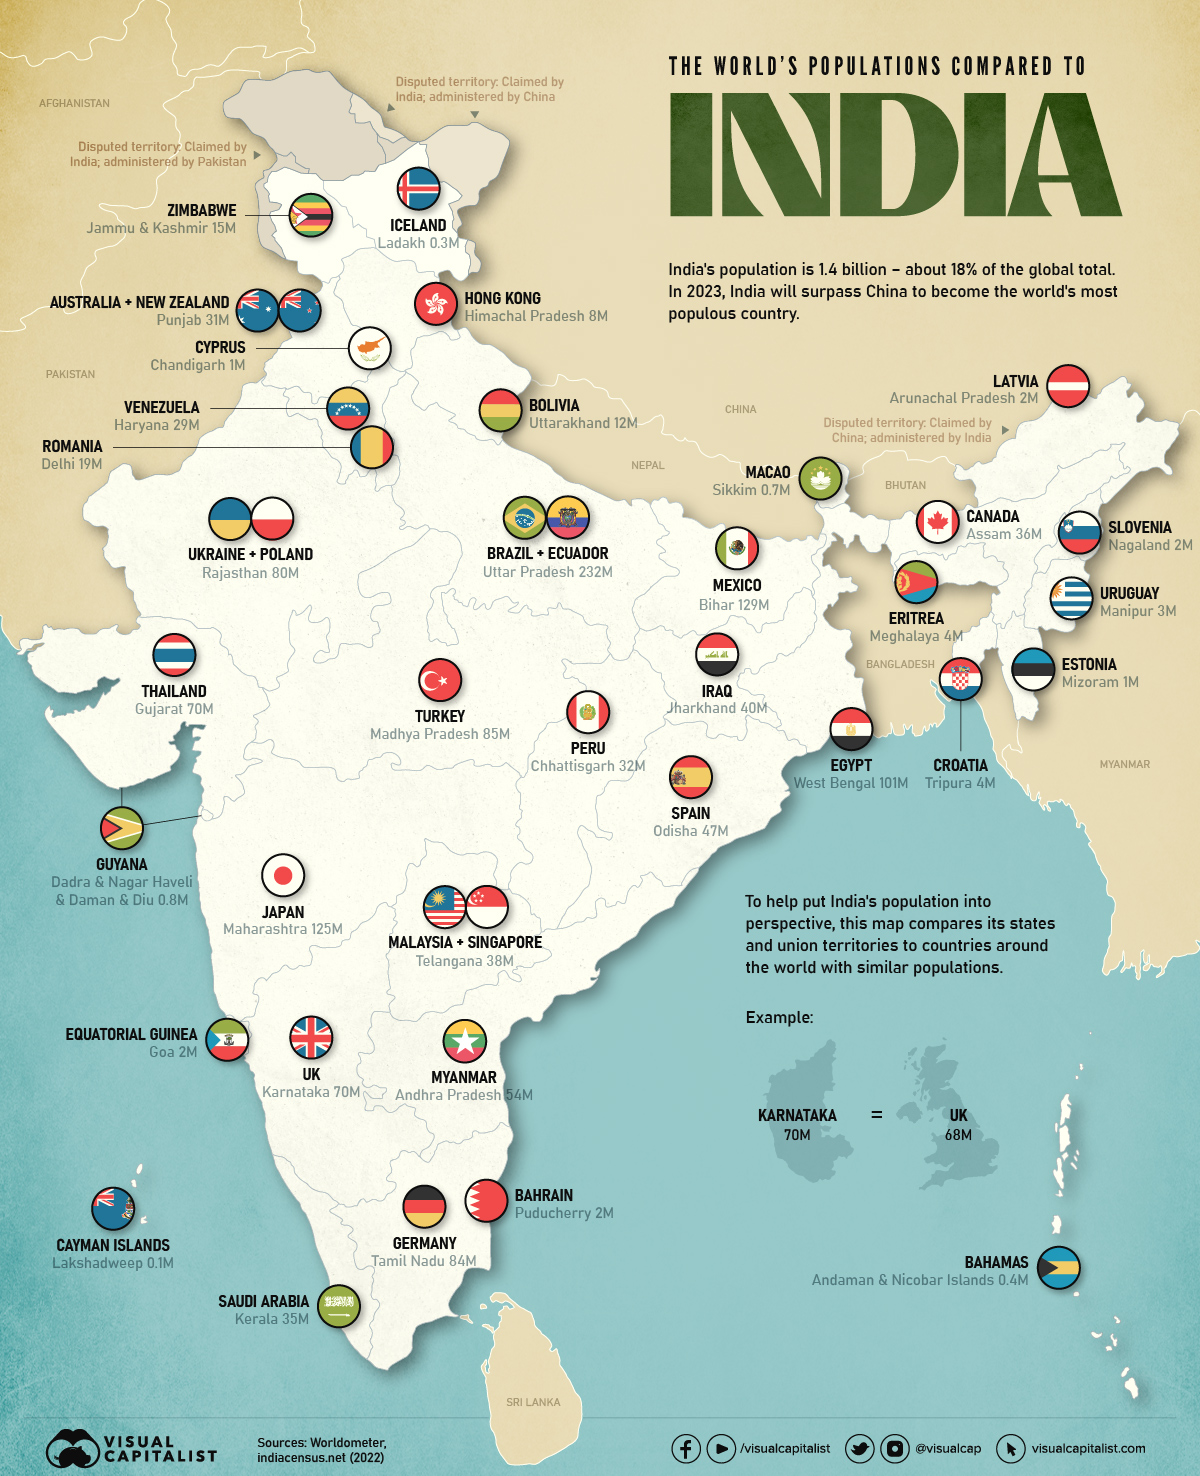 Infographic map showing the population of India's states and territories compared to countries